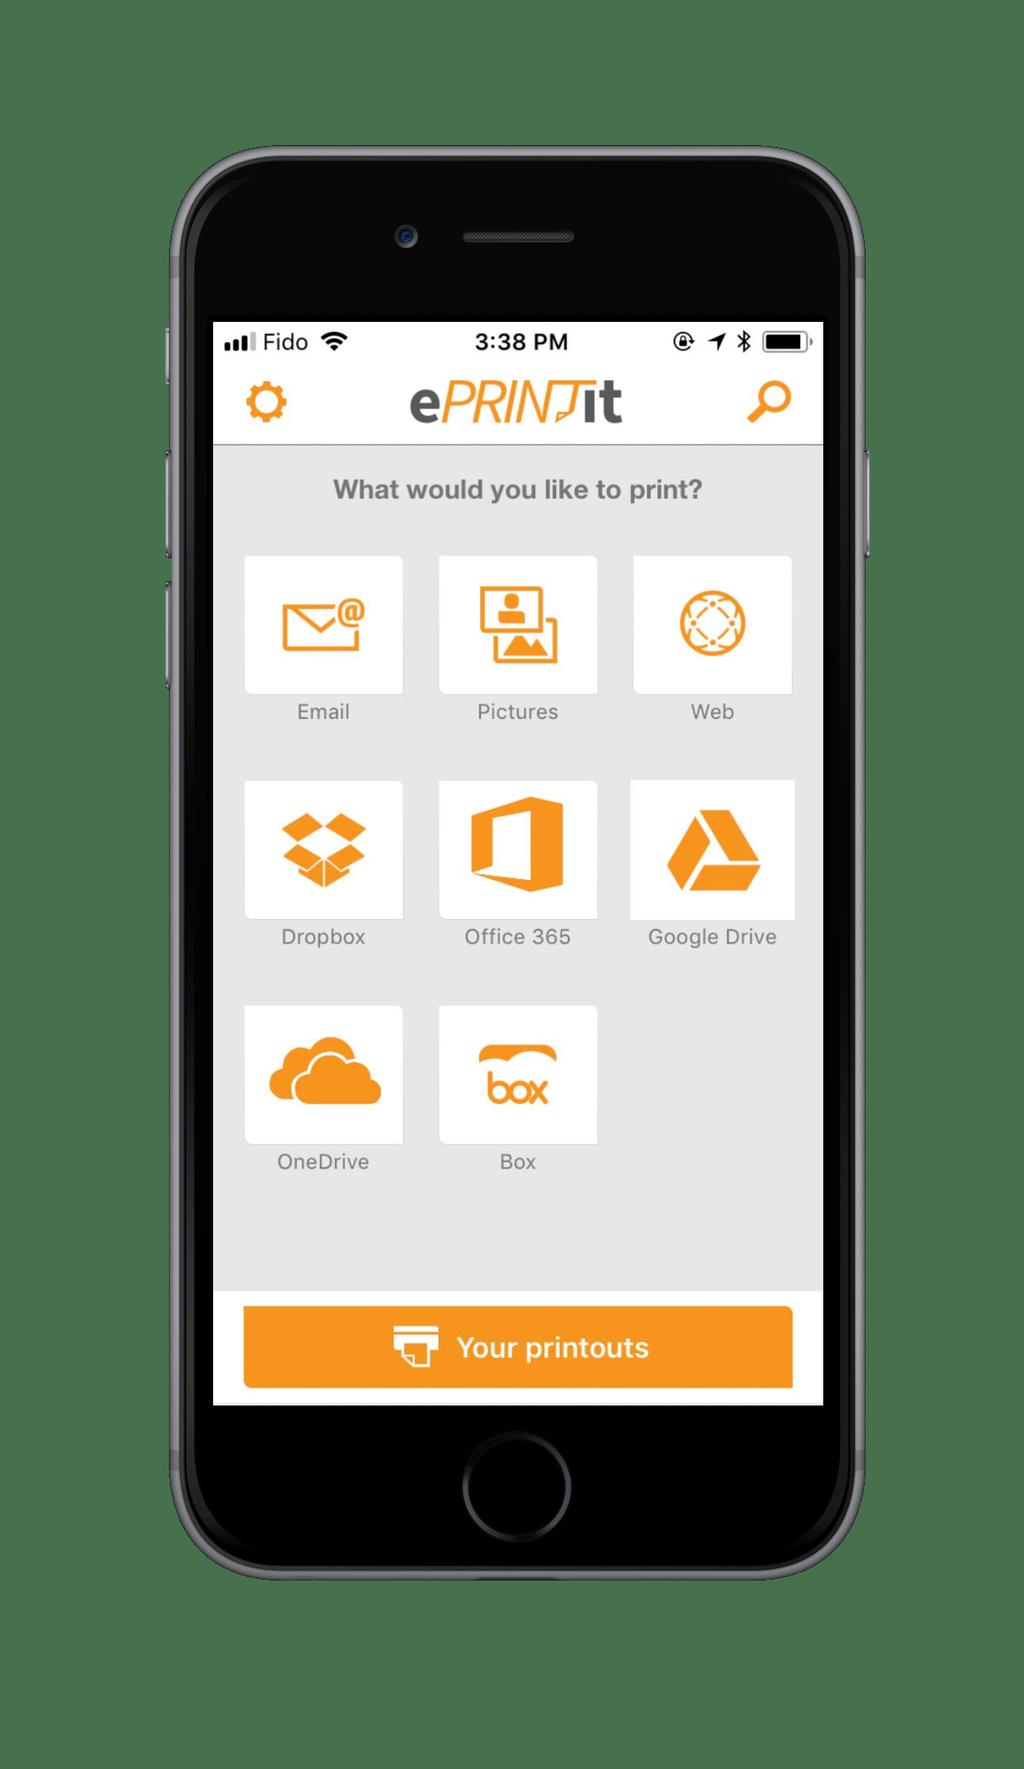 UniPrint.net Group Additional Solutions eprintit is a secure mobile cloud printing platform connecting people who need to print with print locations.